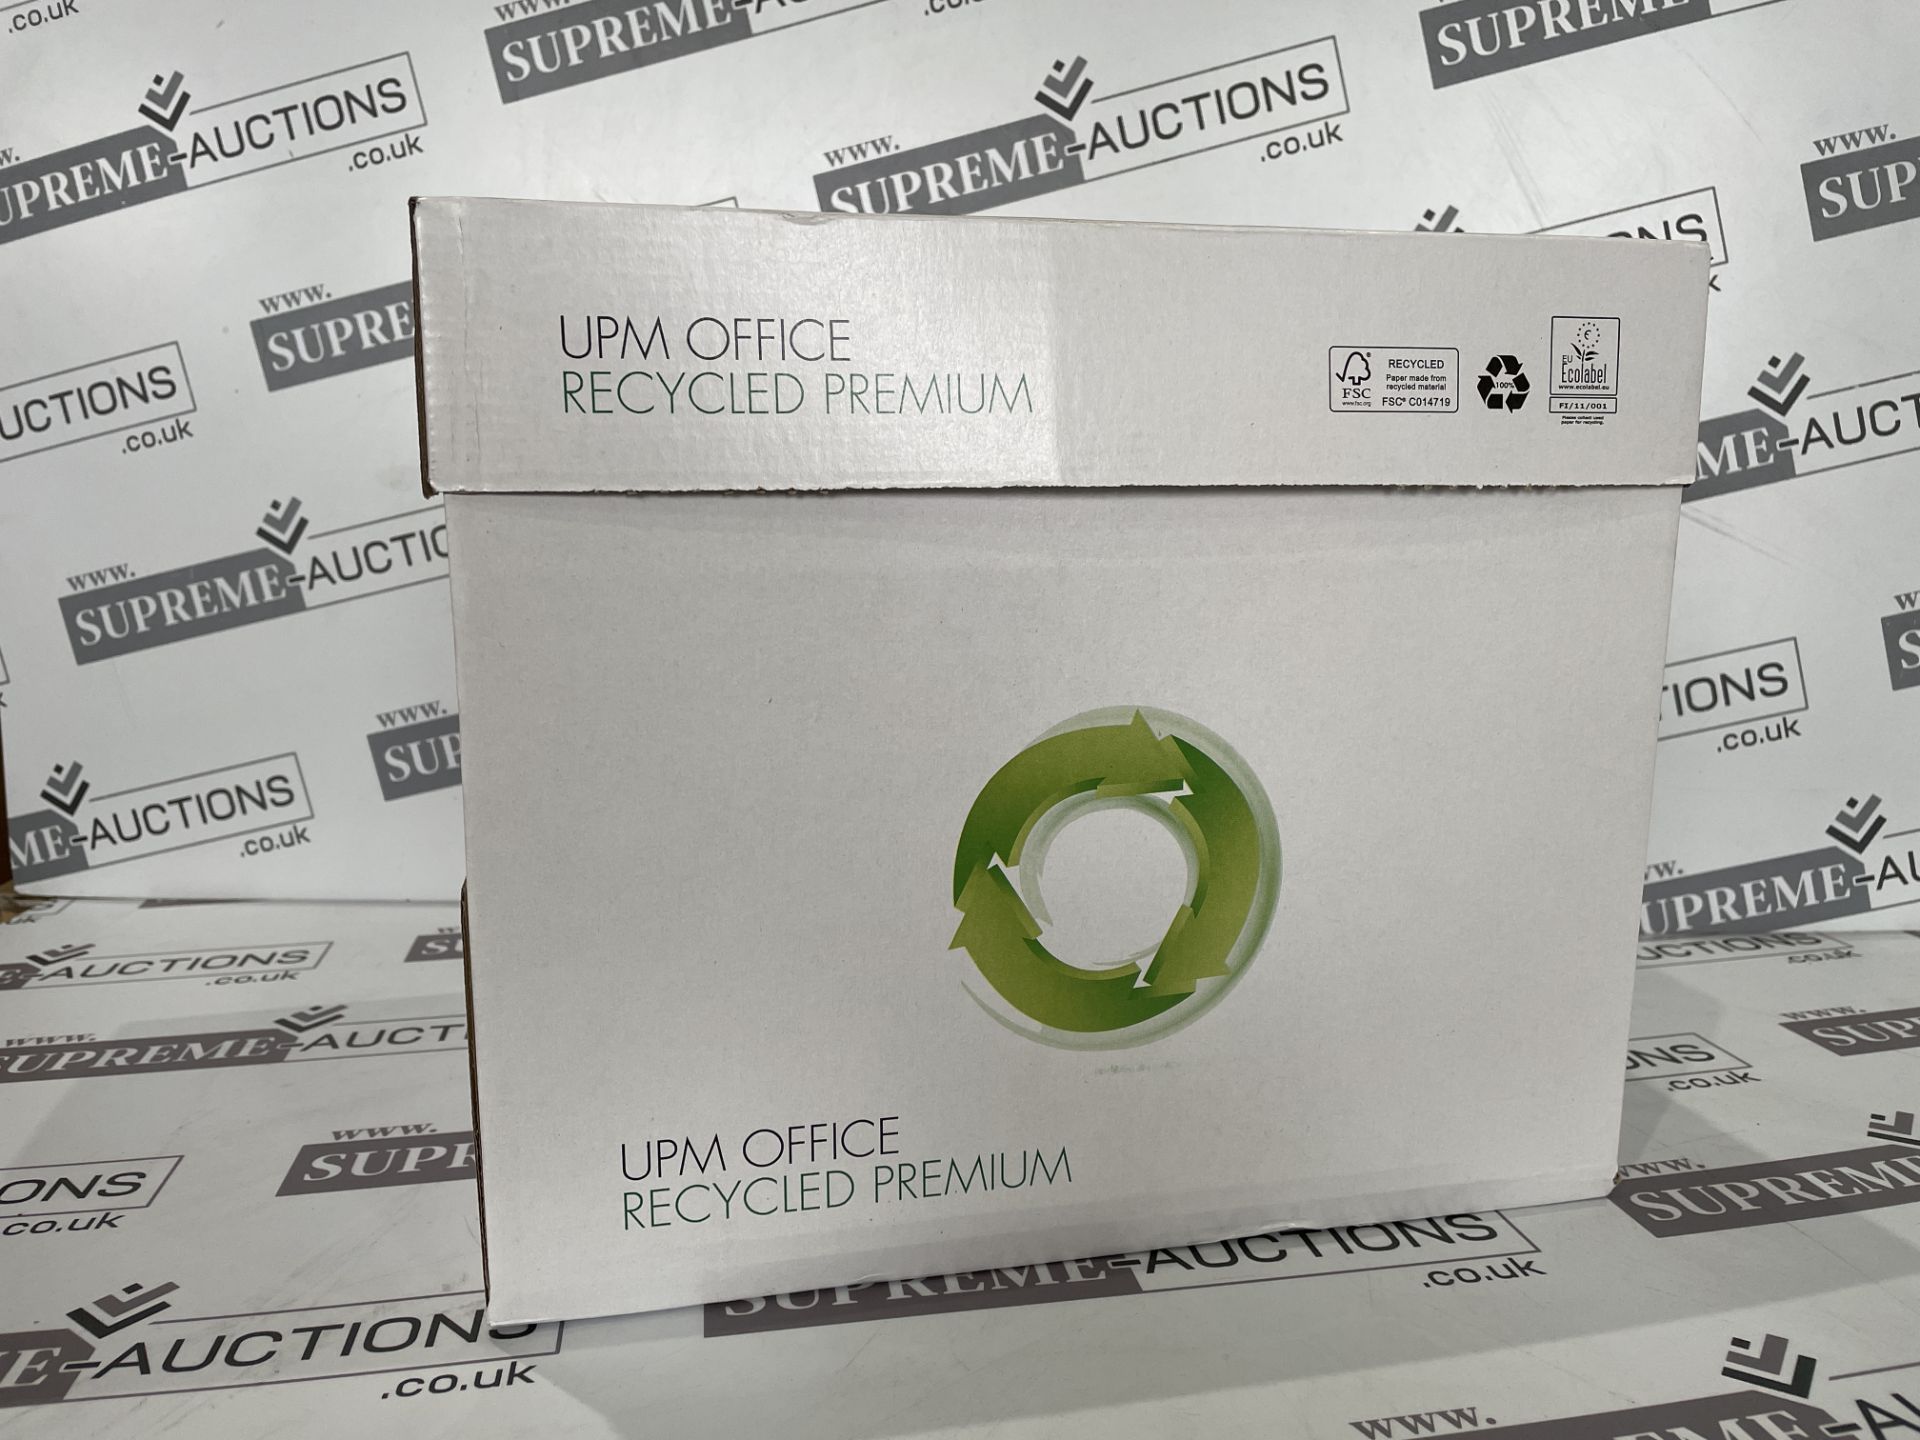 25 X BRAND NEW PACKS OF 500 UPM OFFICE RECYCLED PREMIUM A4 80 G/M2 PAPER IN 5 BOXES R16-12